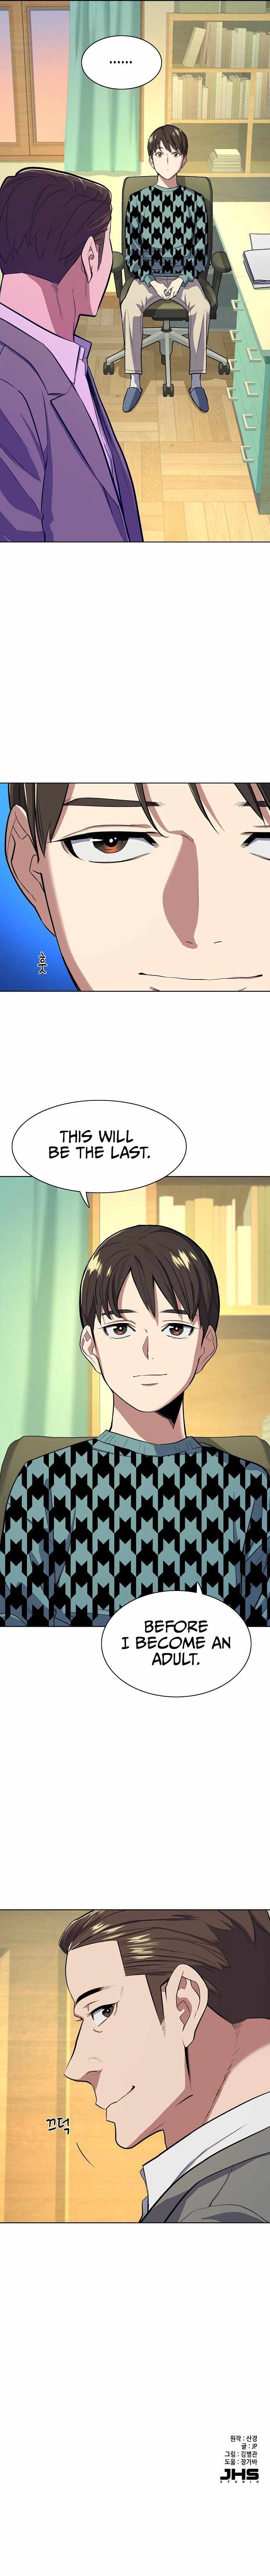 The Chaebeol’s Youngest Son chapter 14